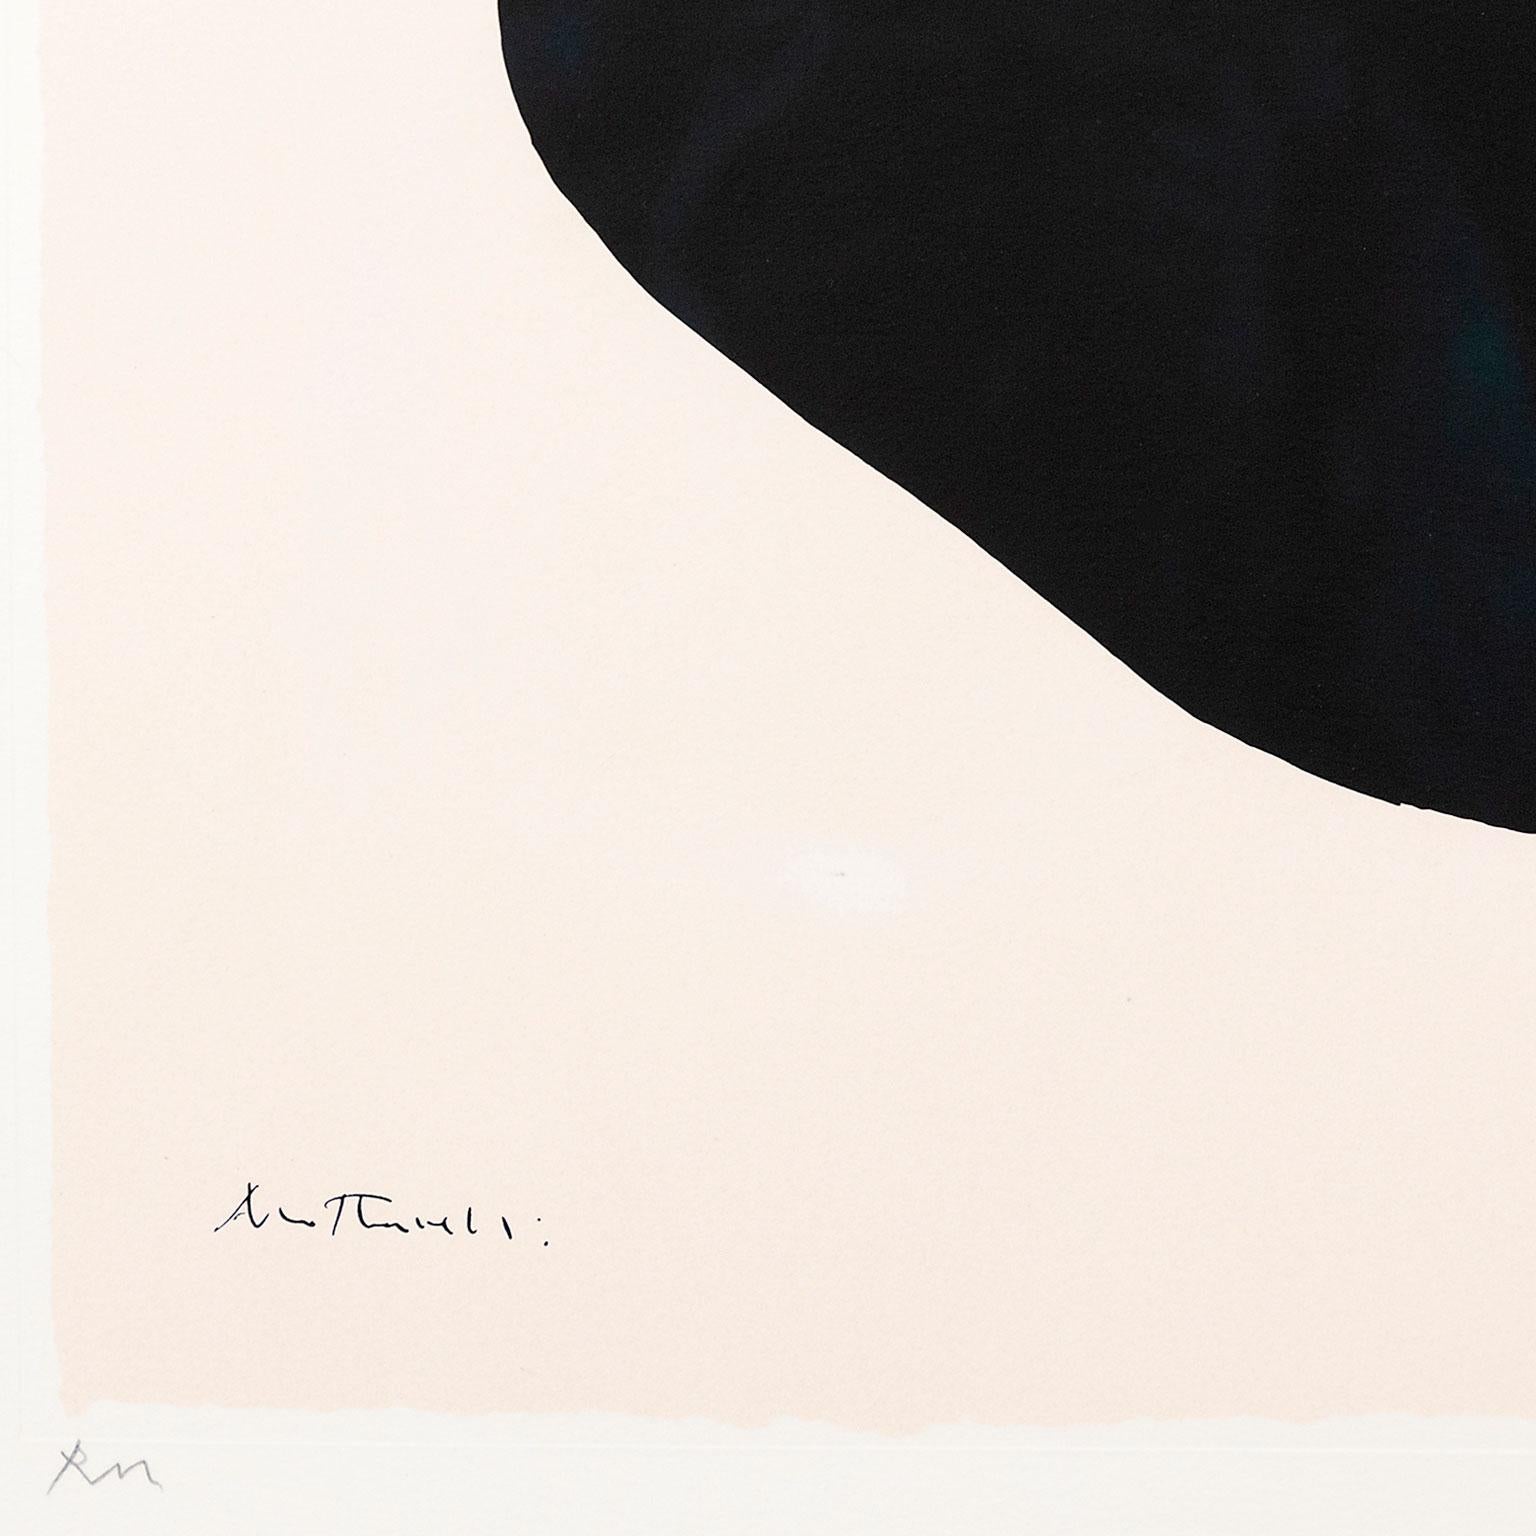 Africa Suite #10 - Abstract Expressionist Print by Robert Motherwell